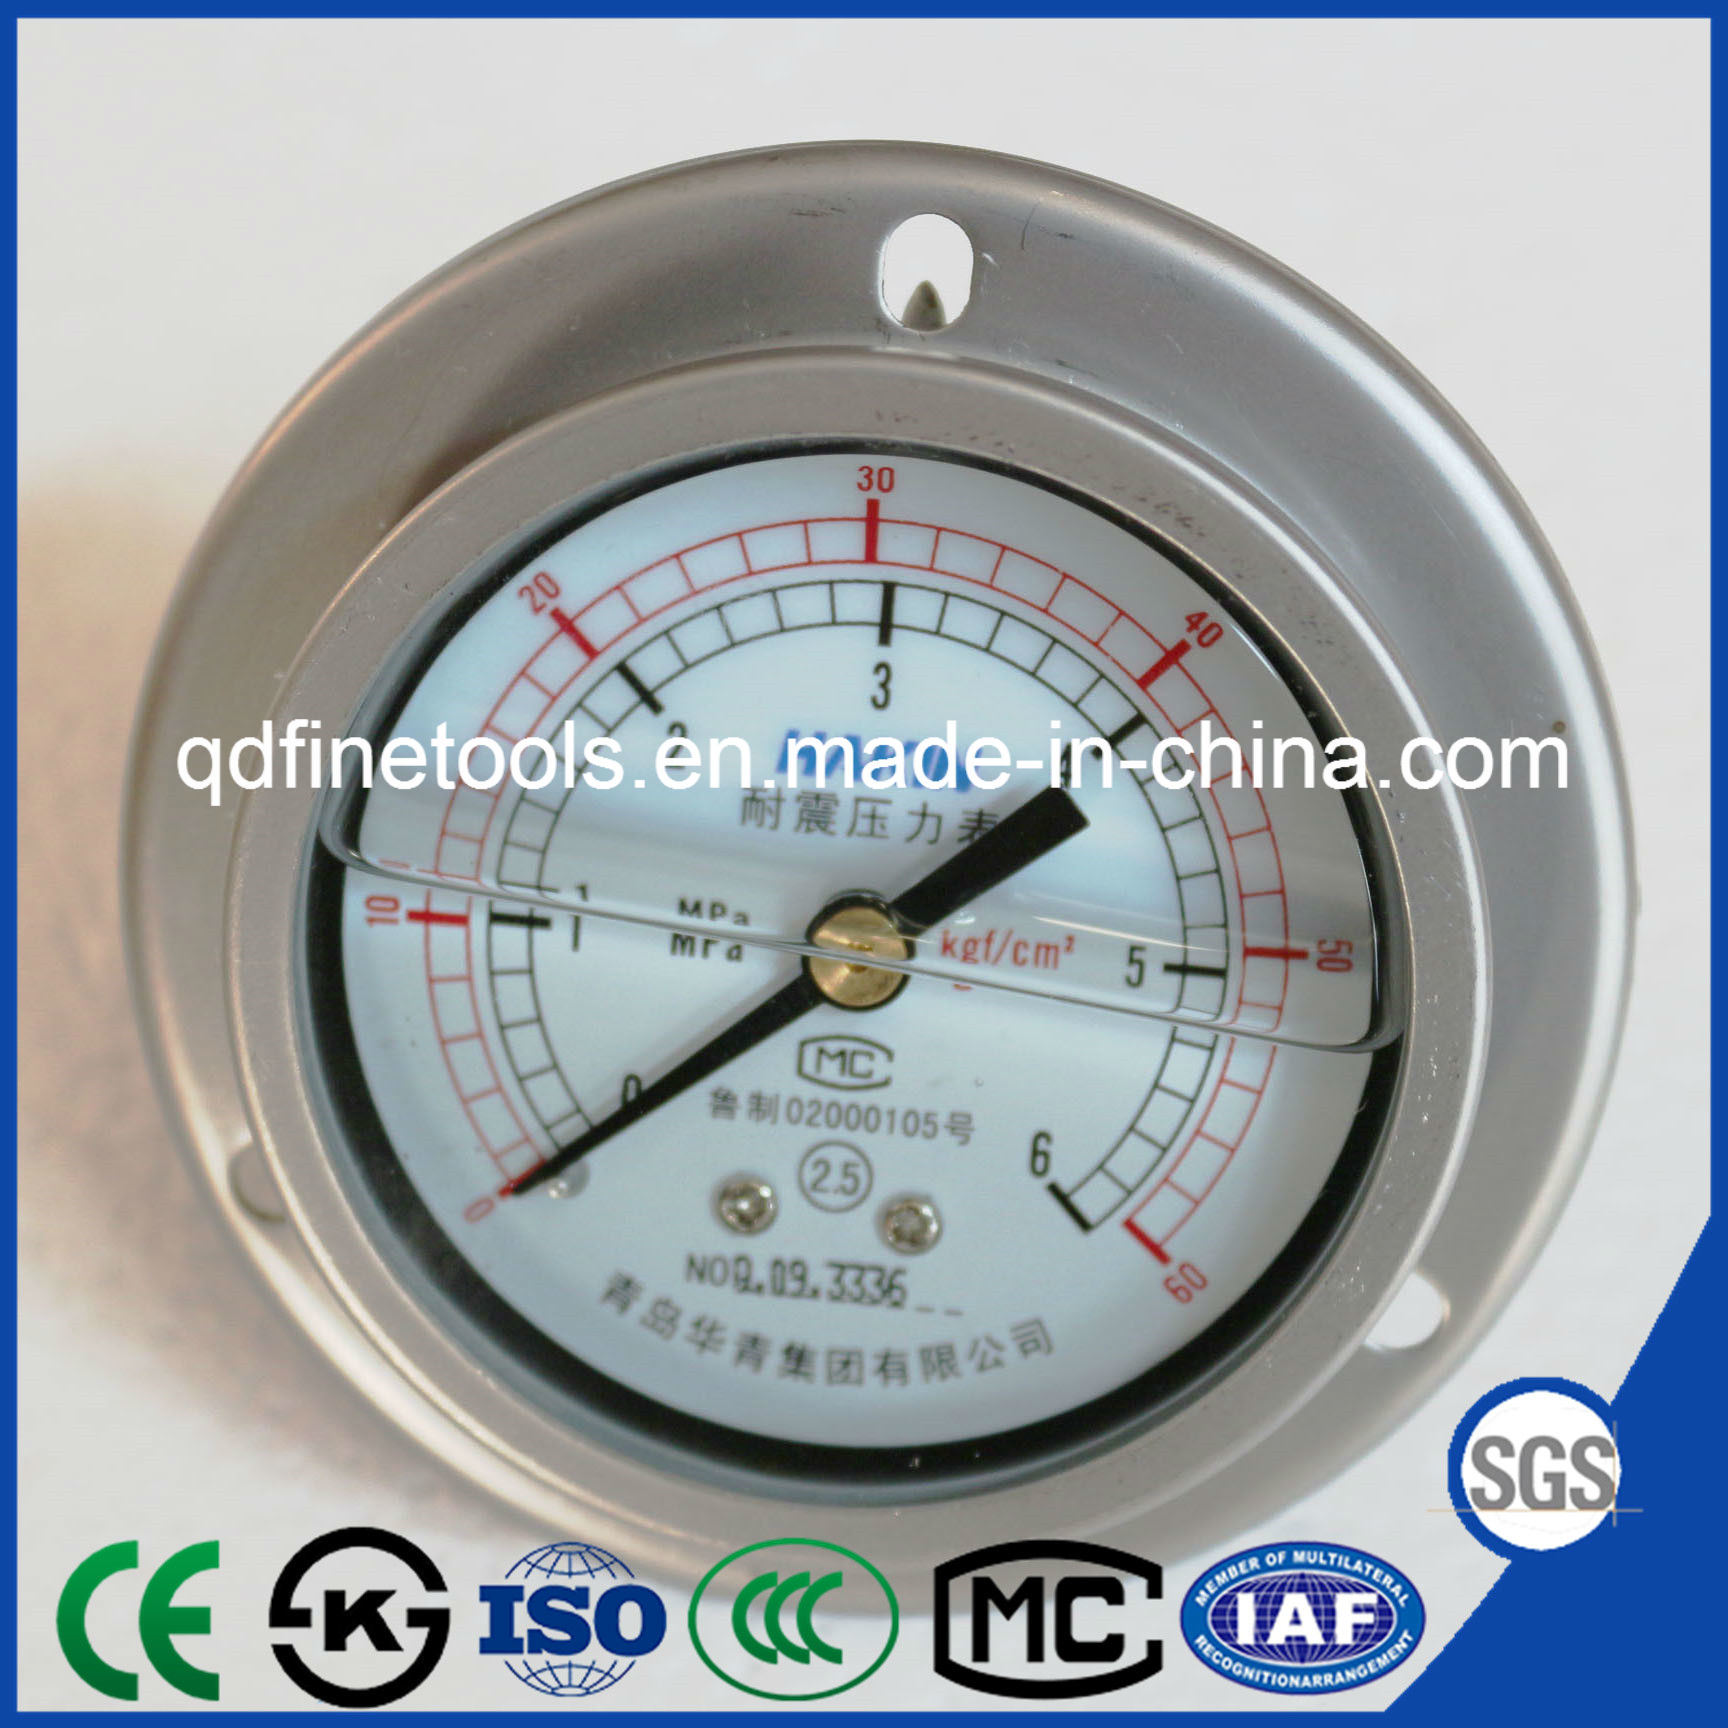 Ybn-150 Hot Sale Seismic Precision Pressure Gauge with High Quality